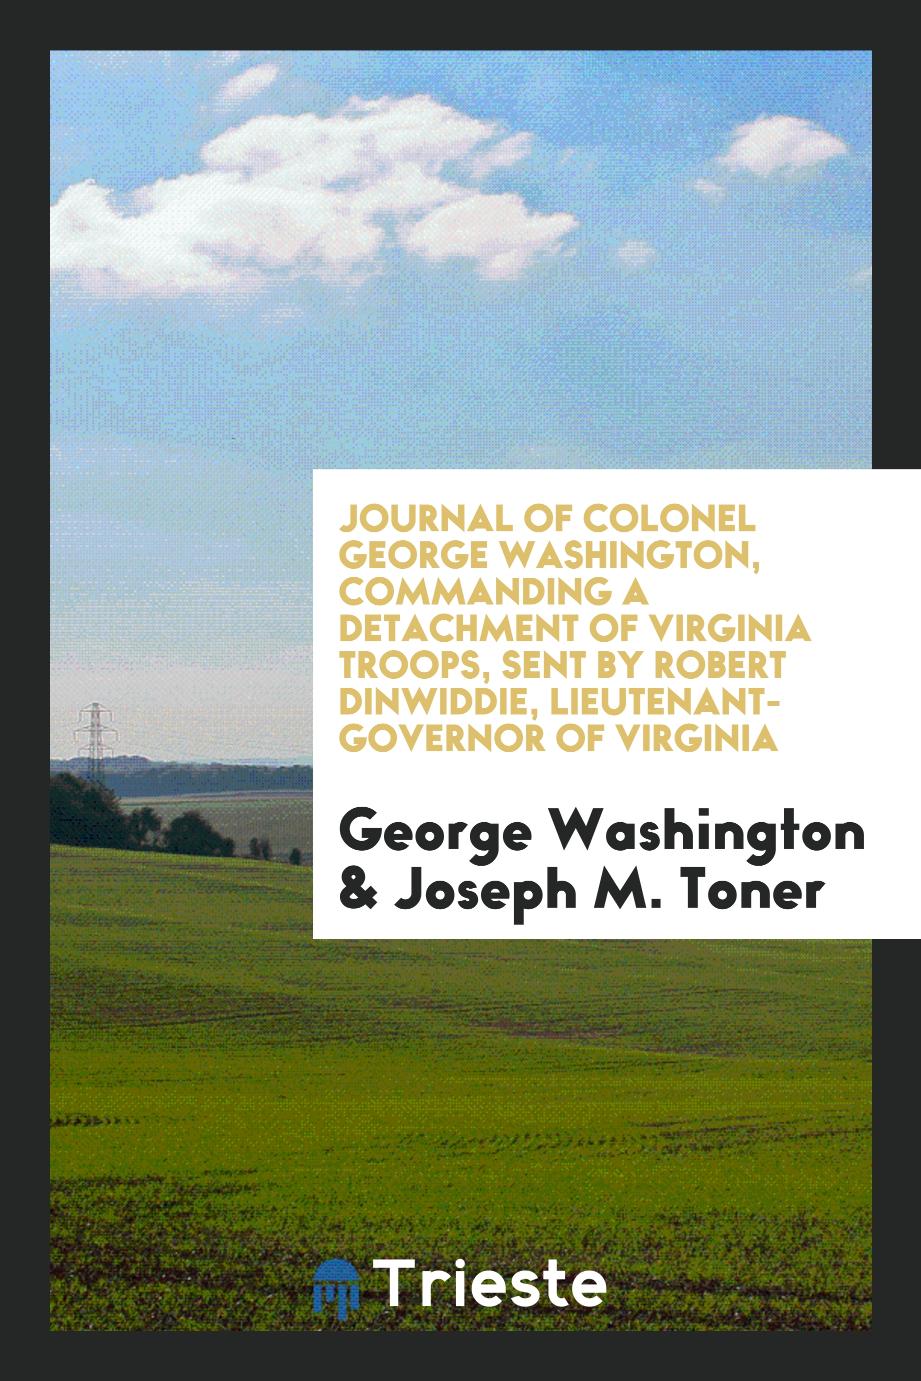 Journal of Colonel George Washington, commanding a detachment of Virginia troops, sent by Robert Dinwiddie, Lieutenant-Governor of Virginia